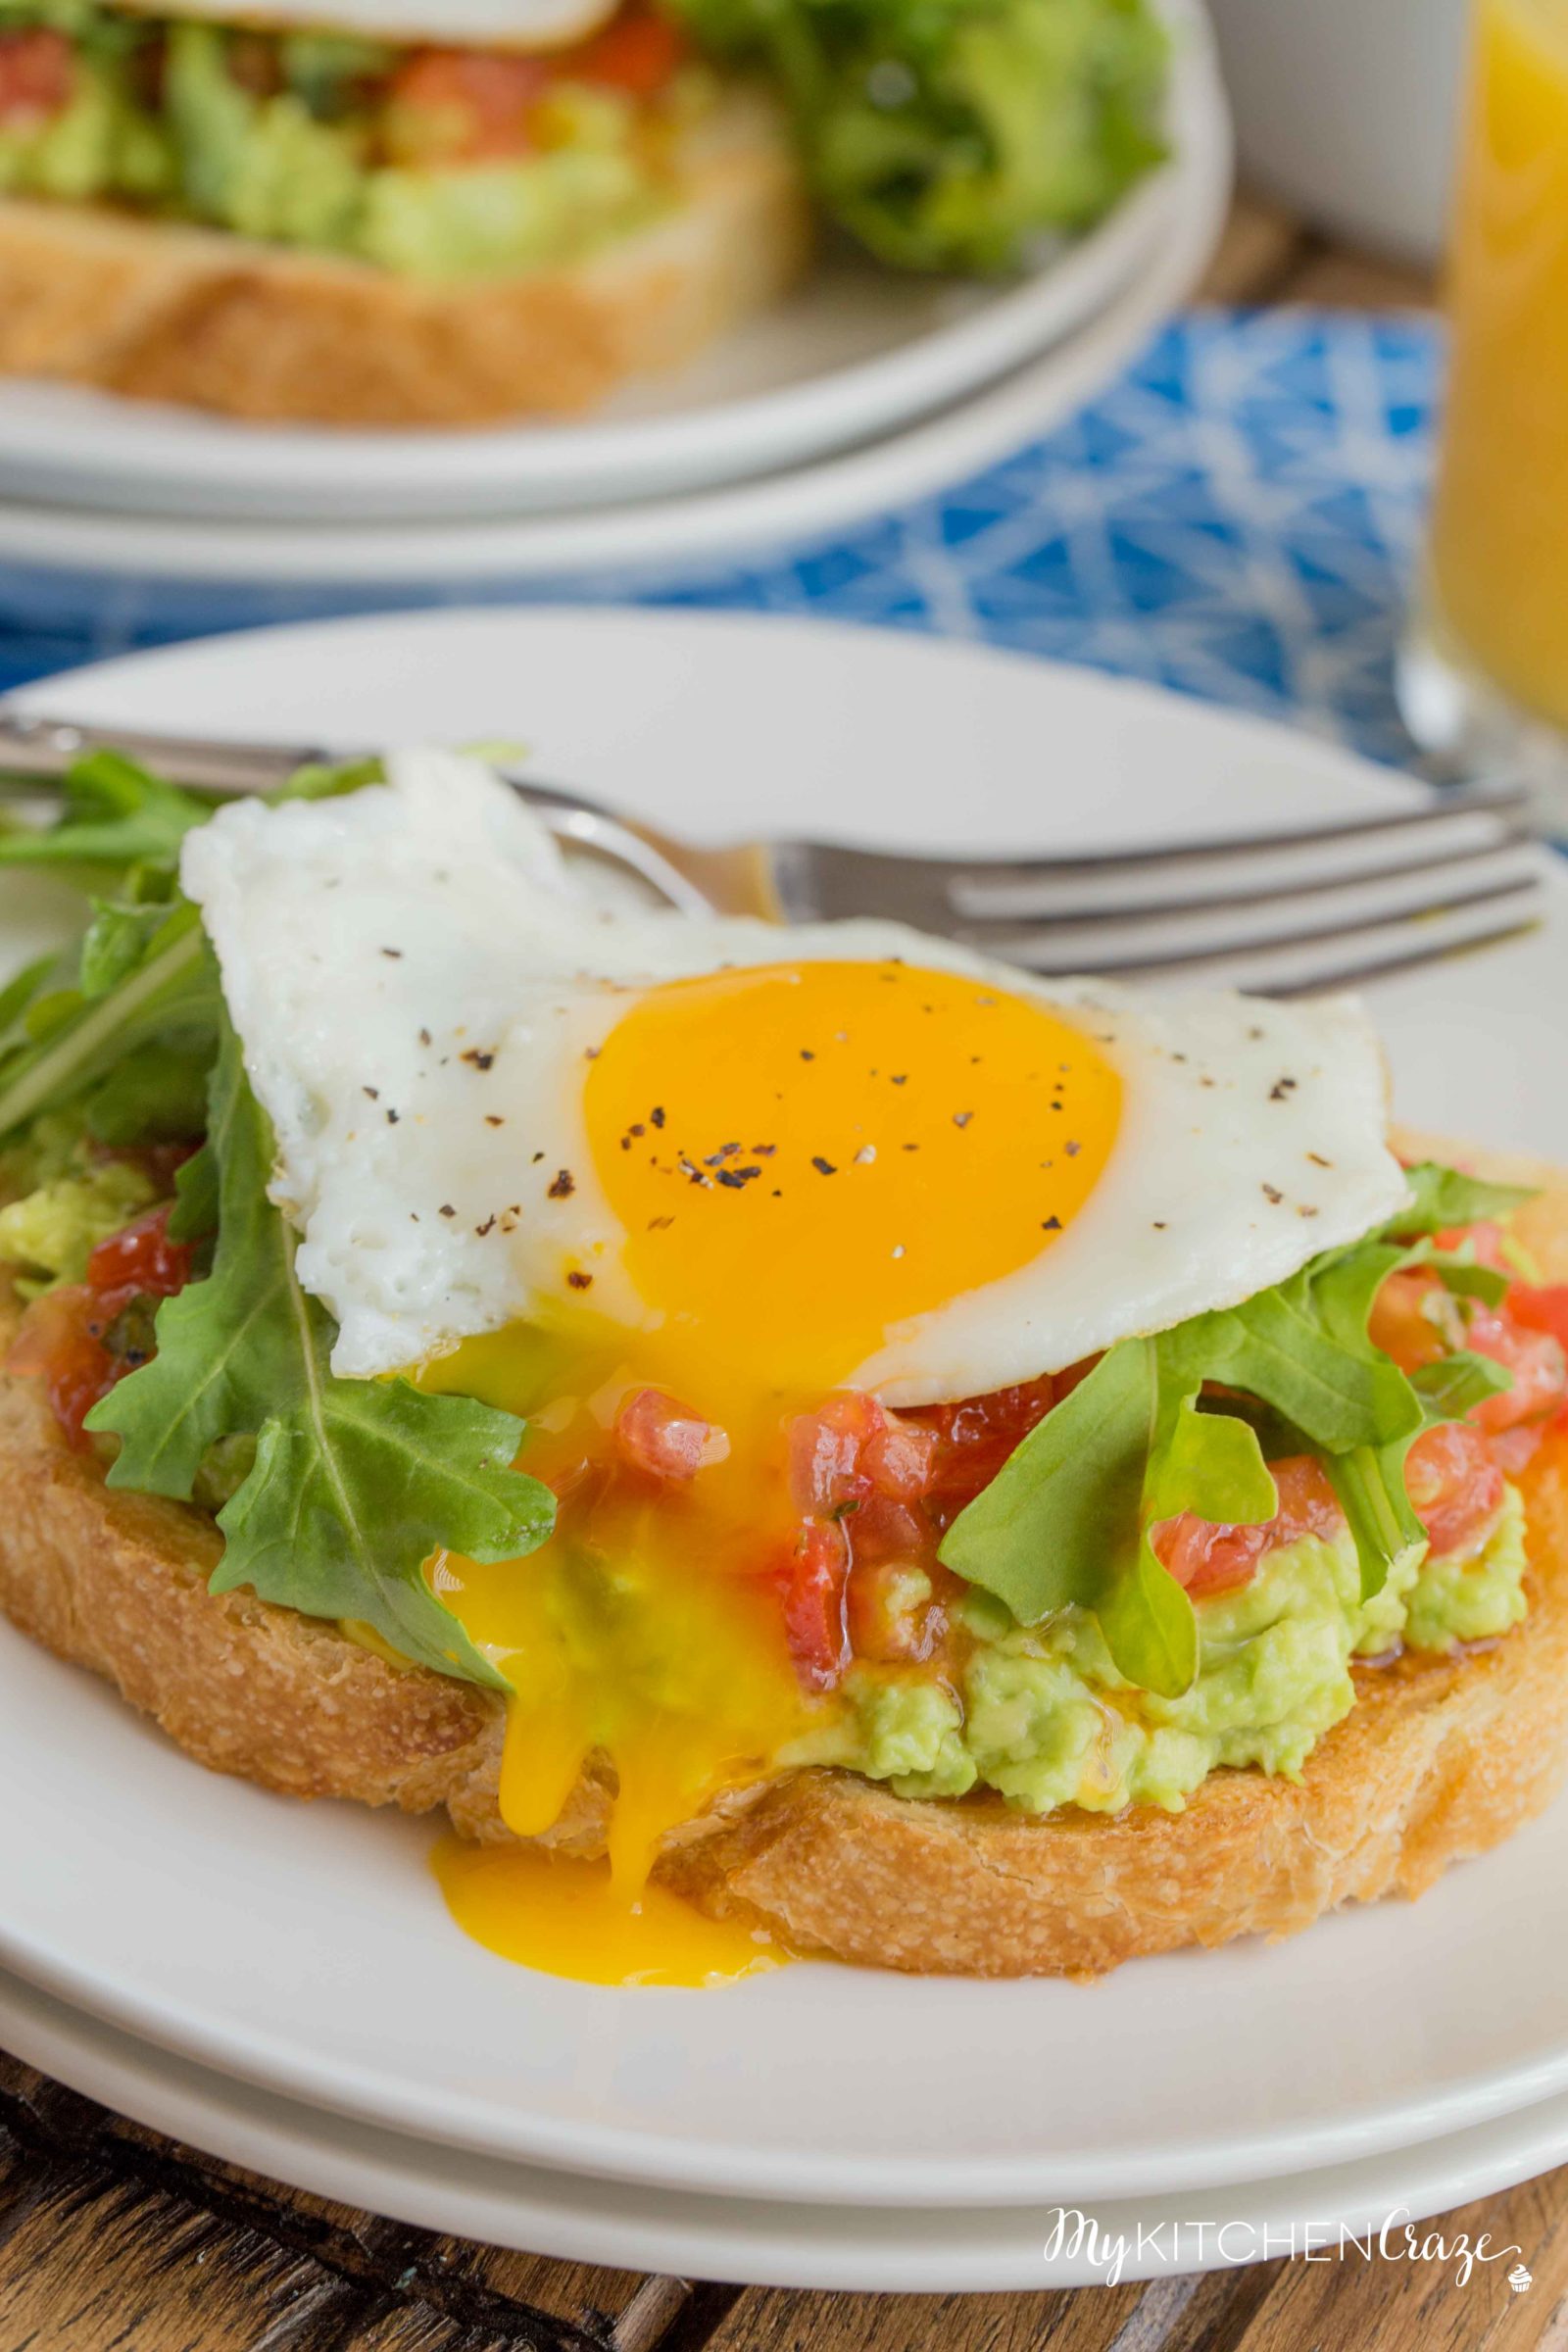 Bruschetta Egg Avocado Toast ~ mykitchencraze.com ~ Sourdough toast loaded with avocado, bruschetta and arugula, then topped with an egg. Perfect way to start your morning!